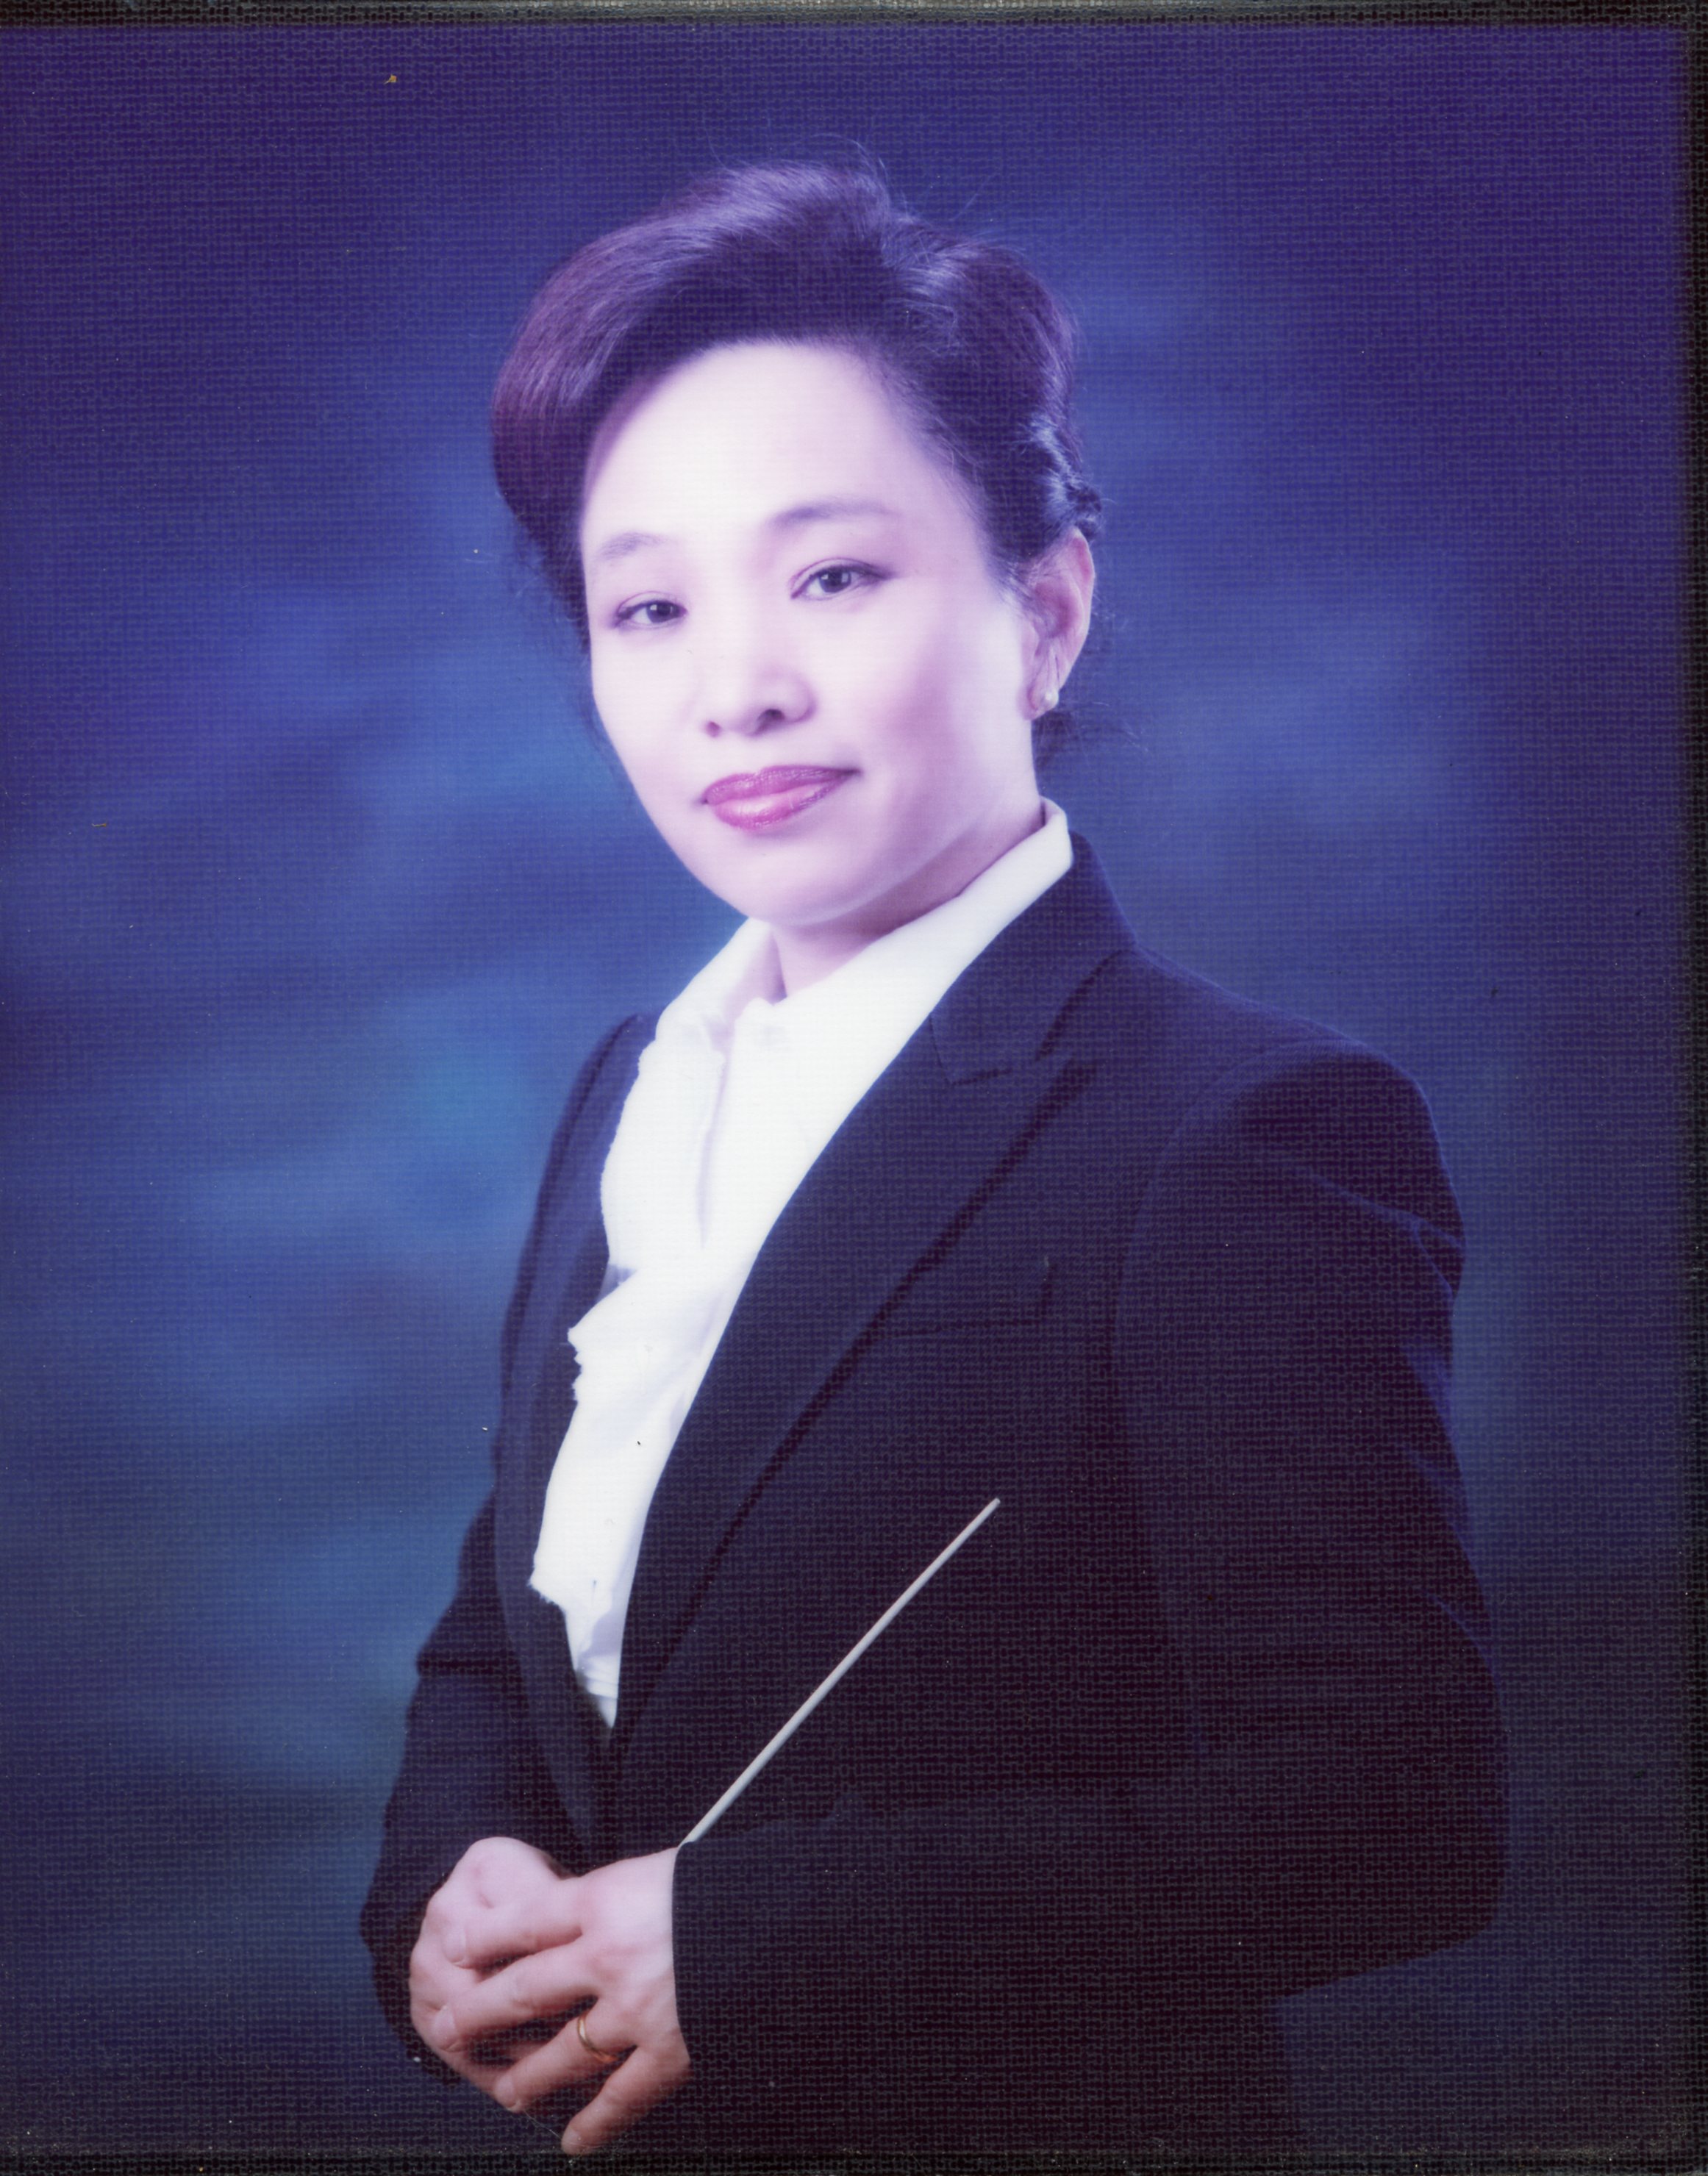 Heamee conductor